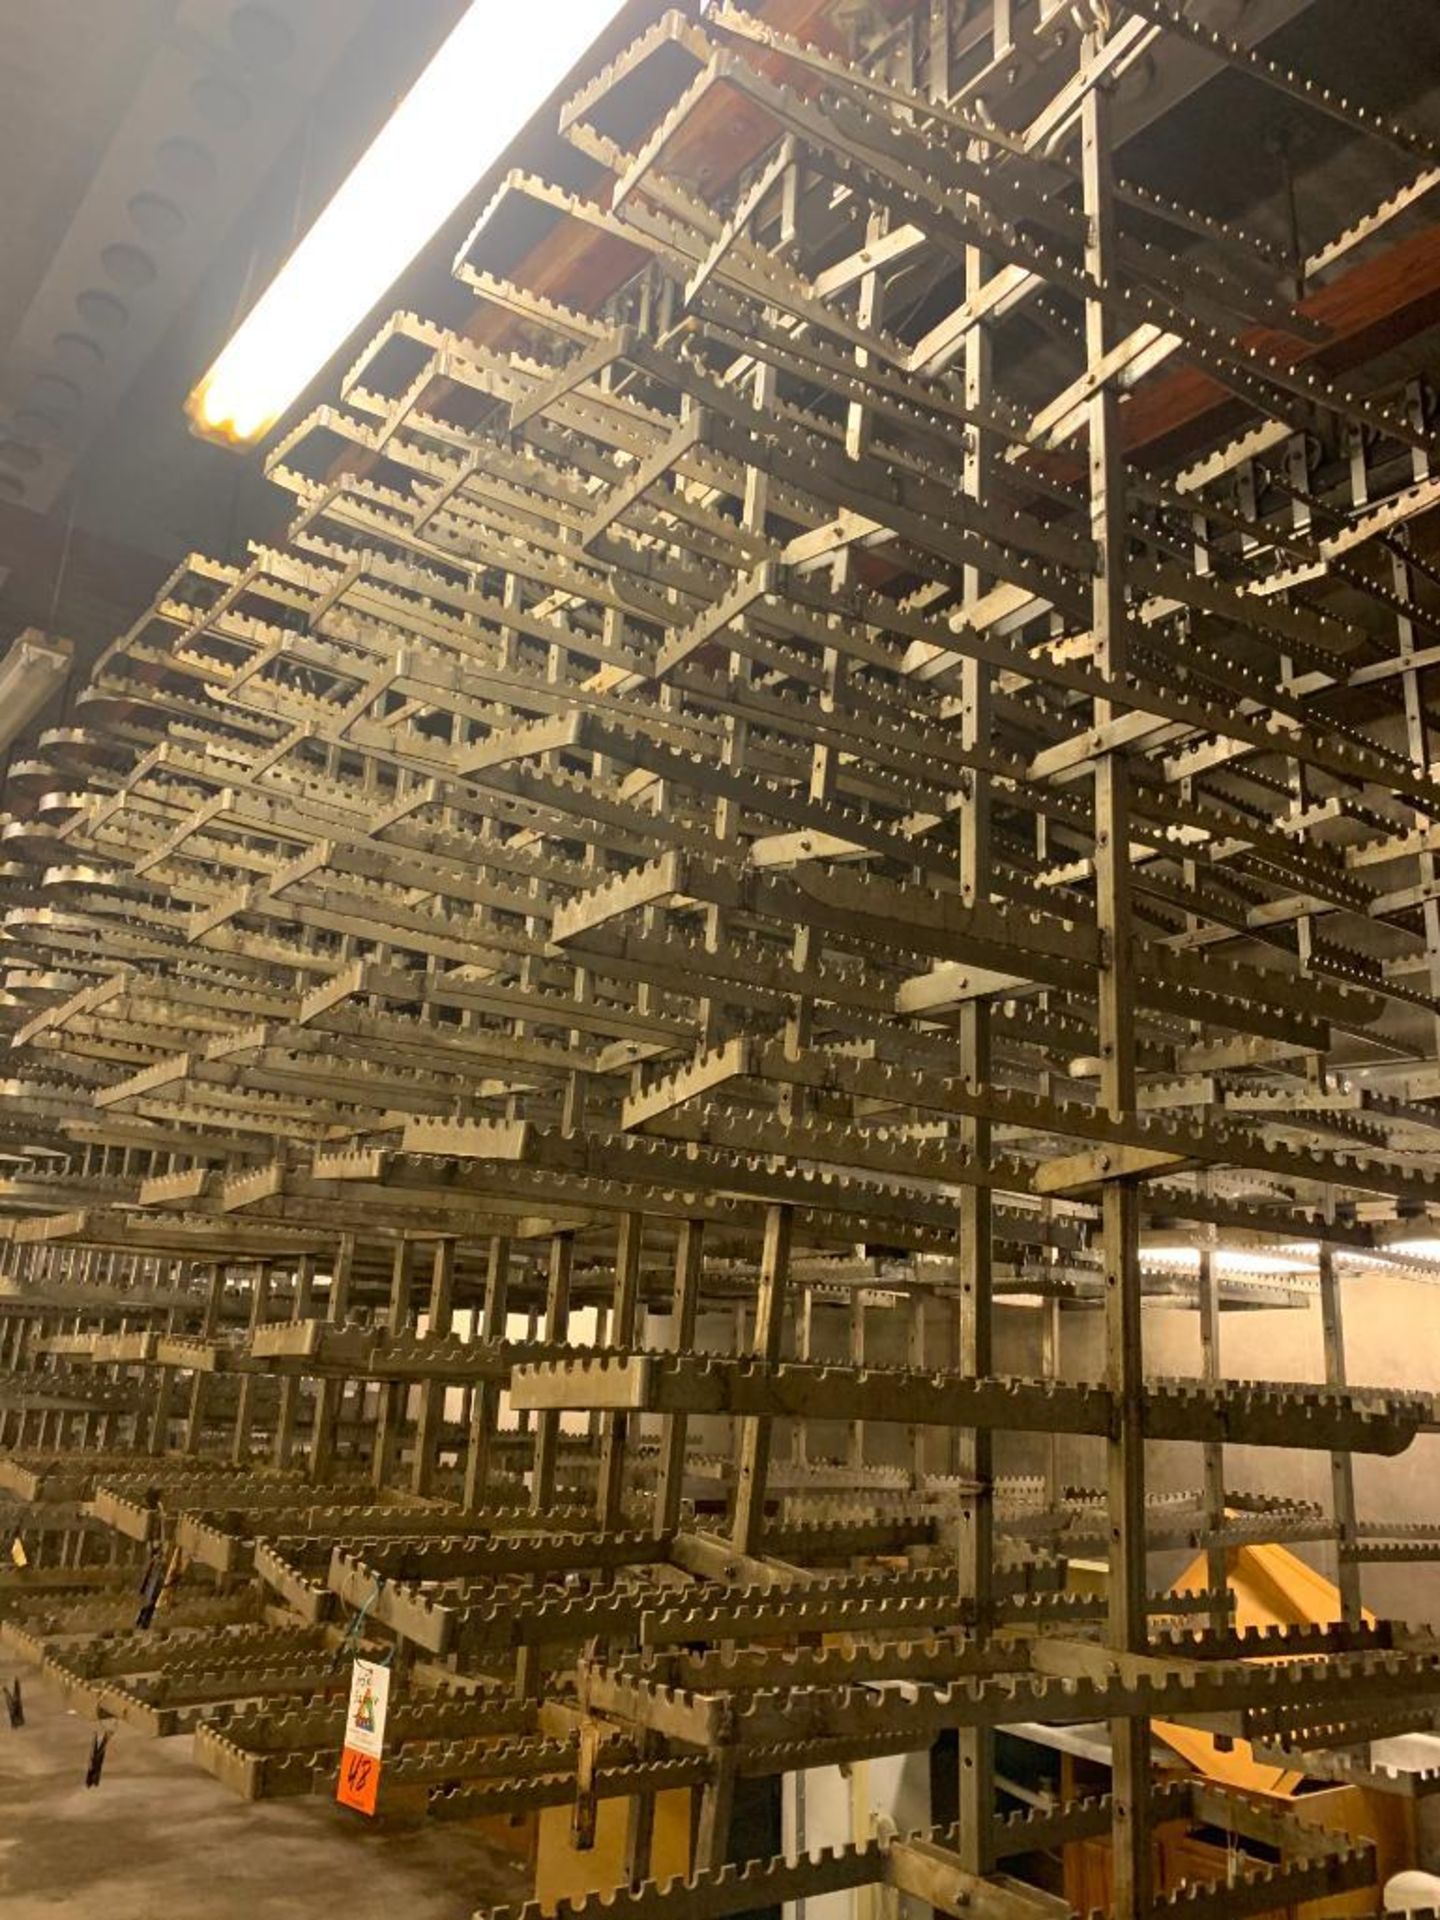 (65) Stainless Steel Rail Trees, Square End Main Tiers, (5) Branch Tiers Between